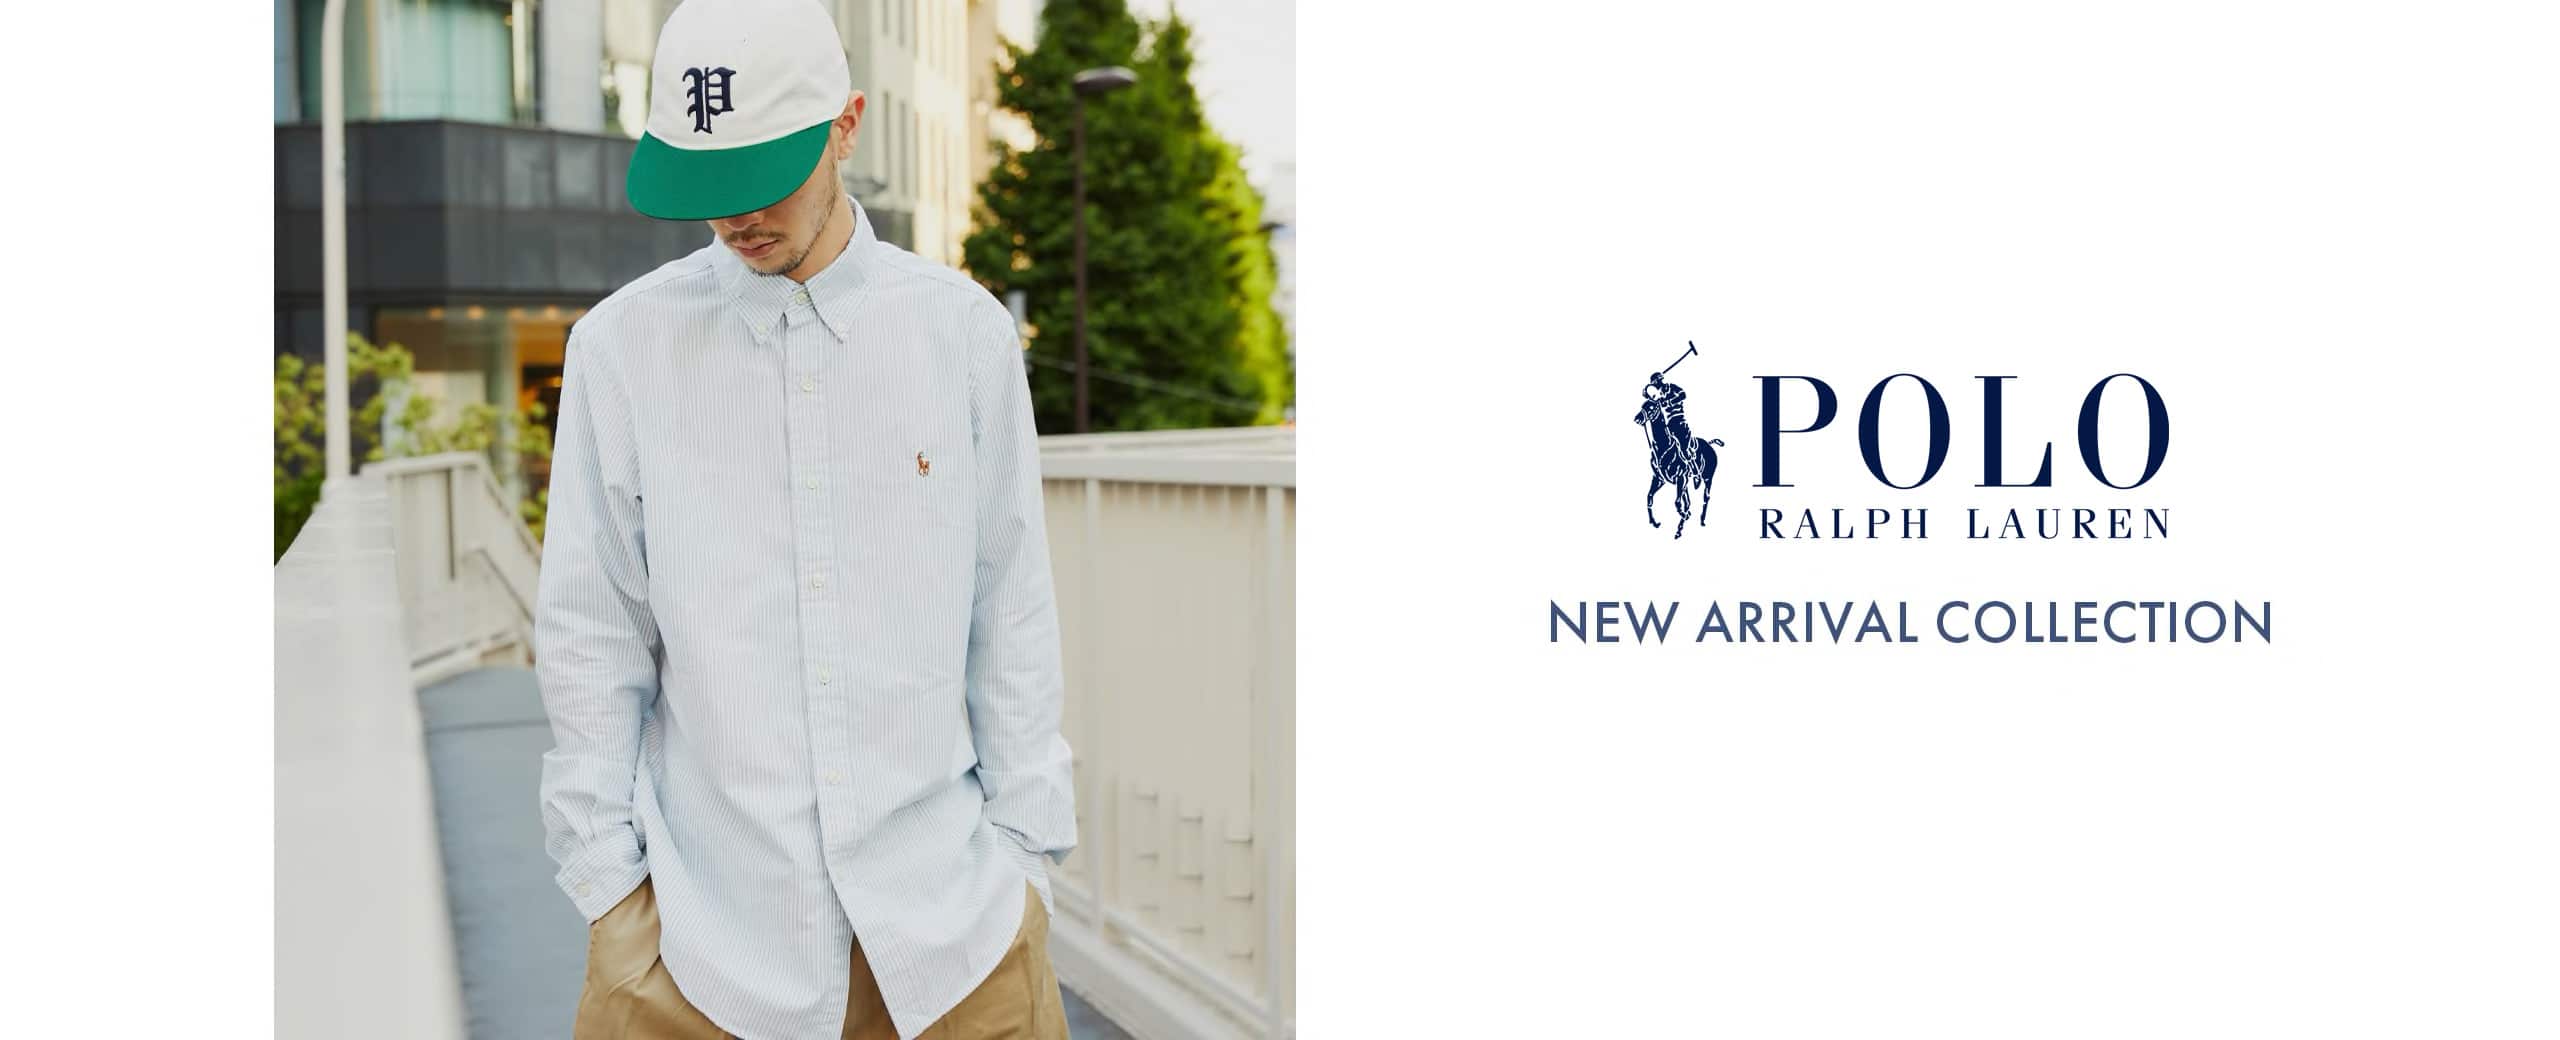 POLO RALPH LAUREN NEW ARRIVAL COLLECTION